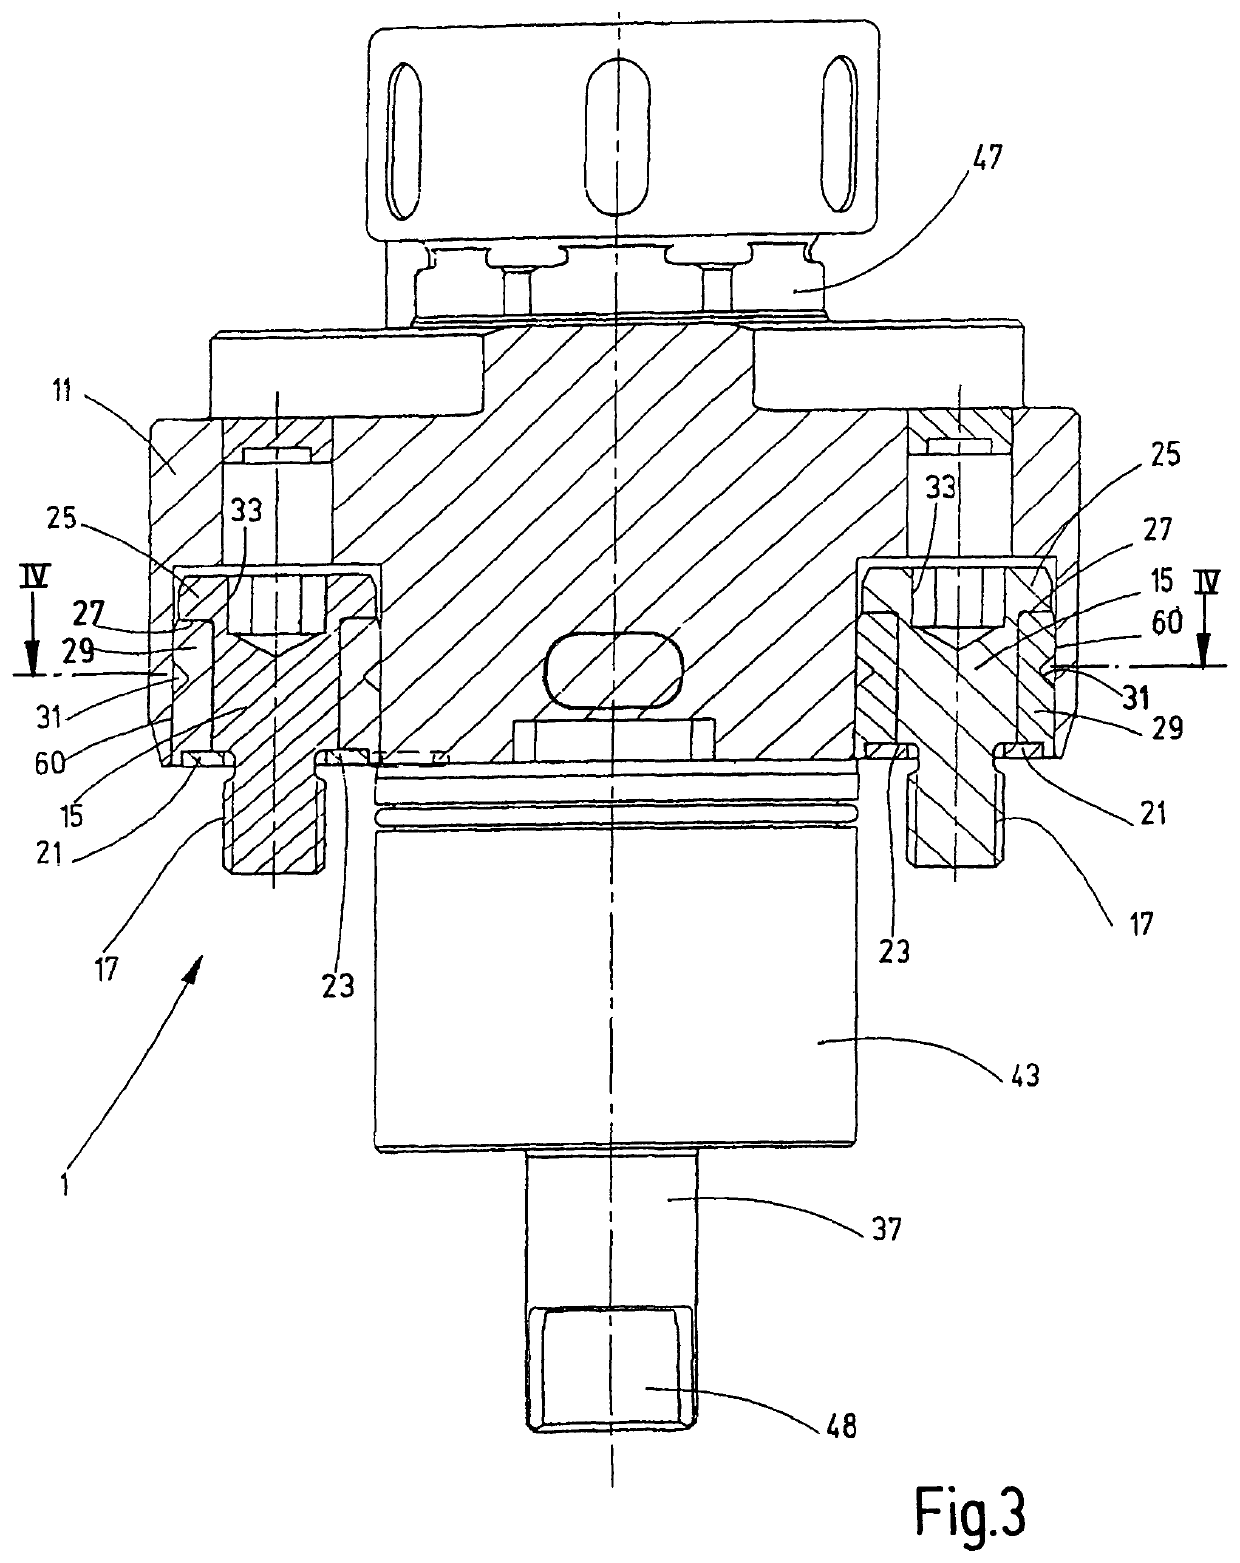 Device for detachably securing modules